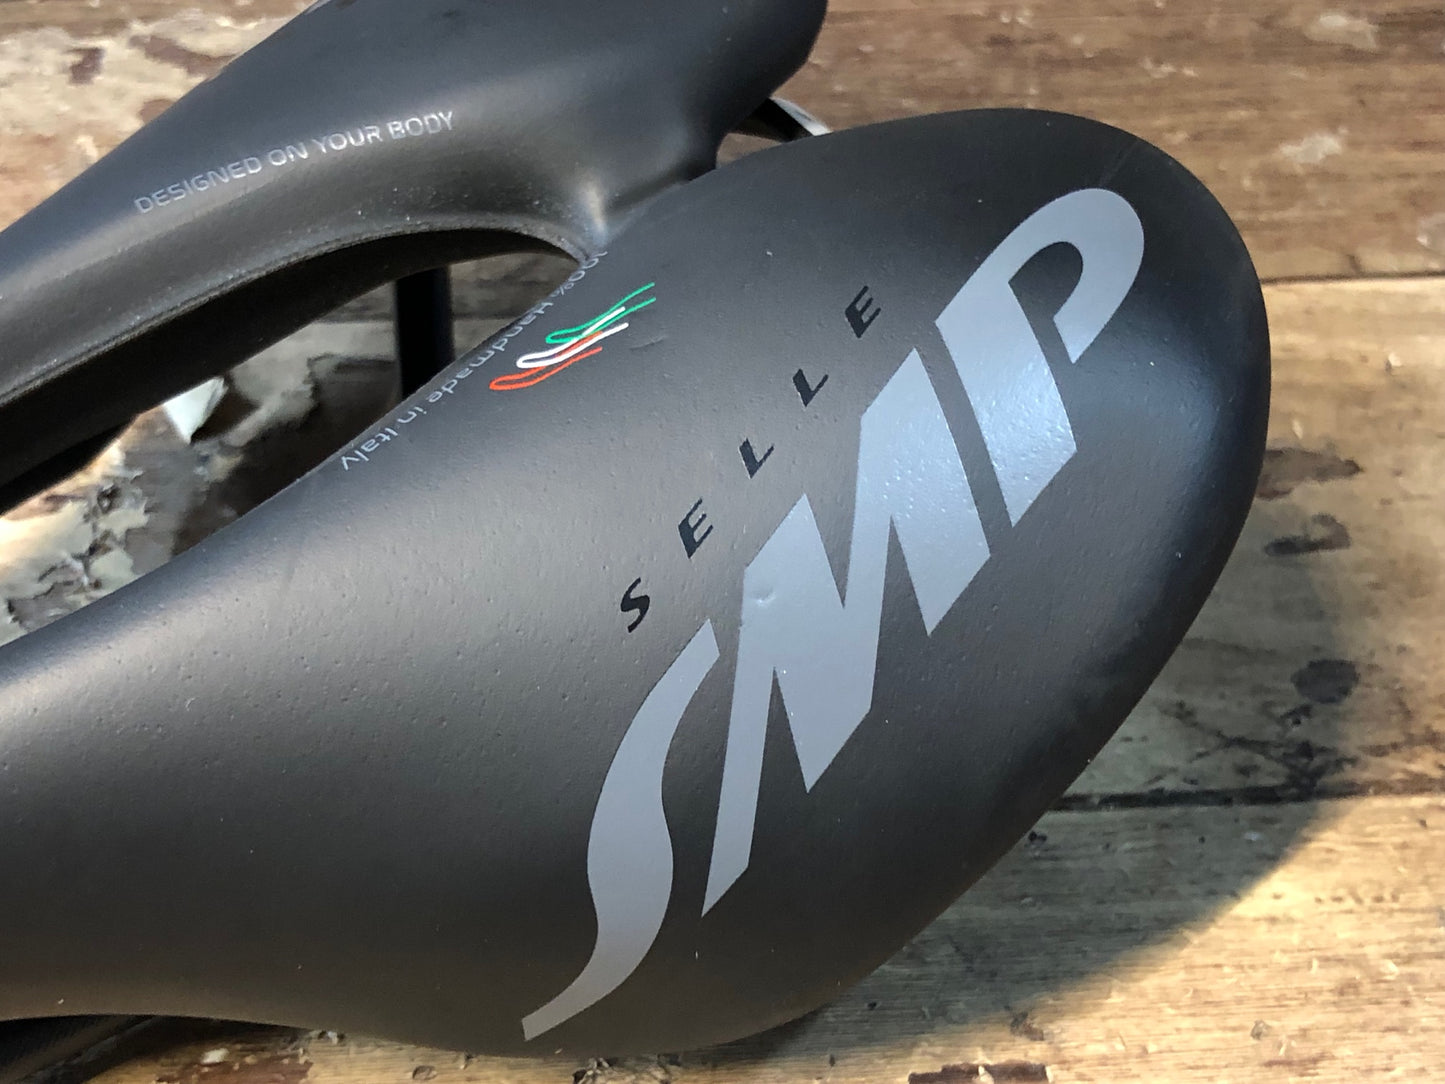 HY190 SELLE SMP VT20C サドル 黒 144mm aisi 304 tube